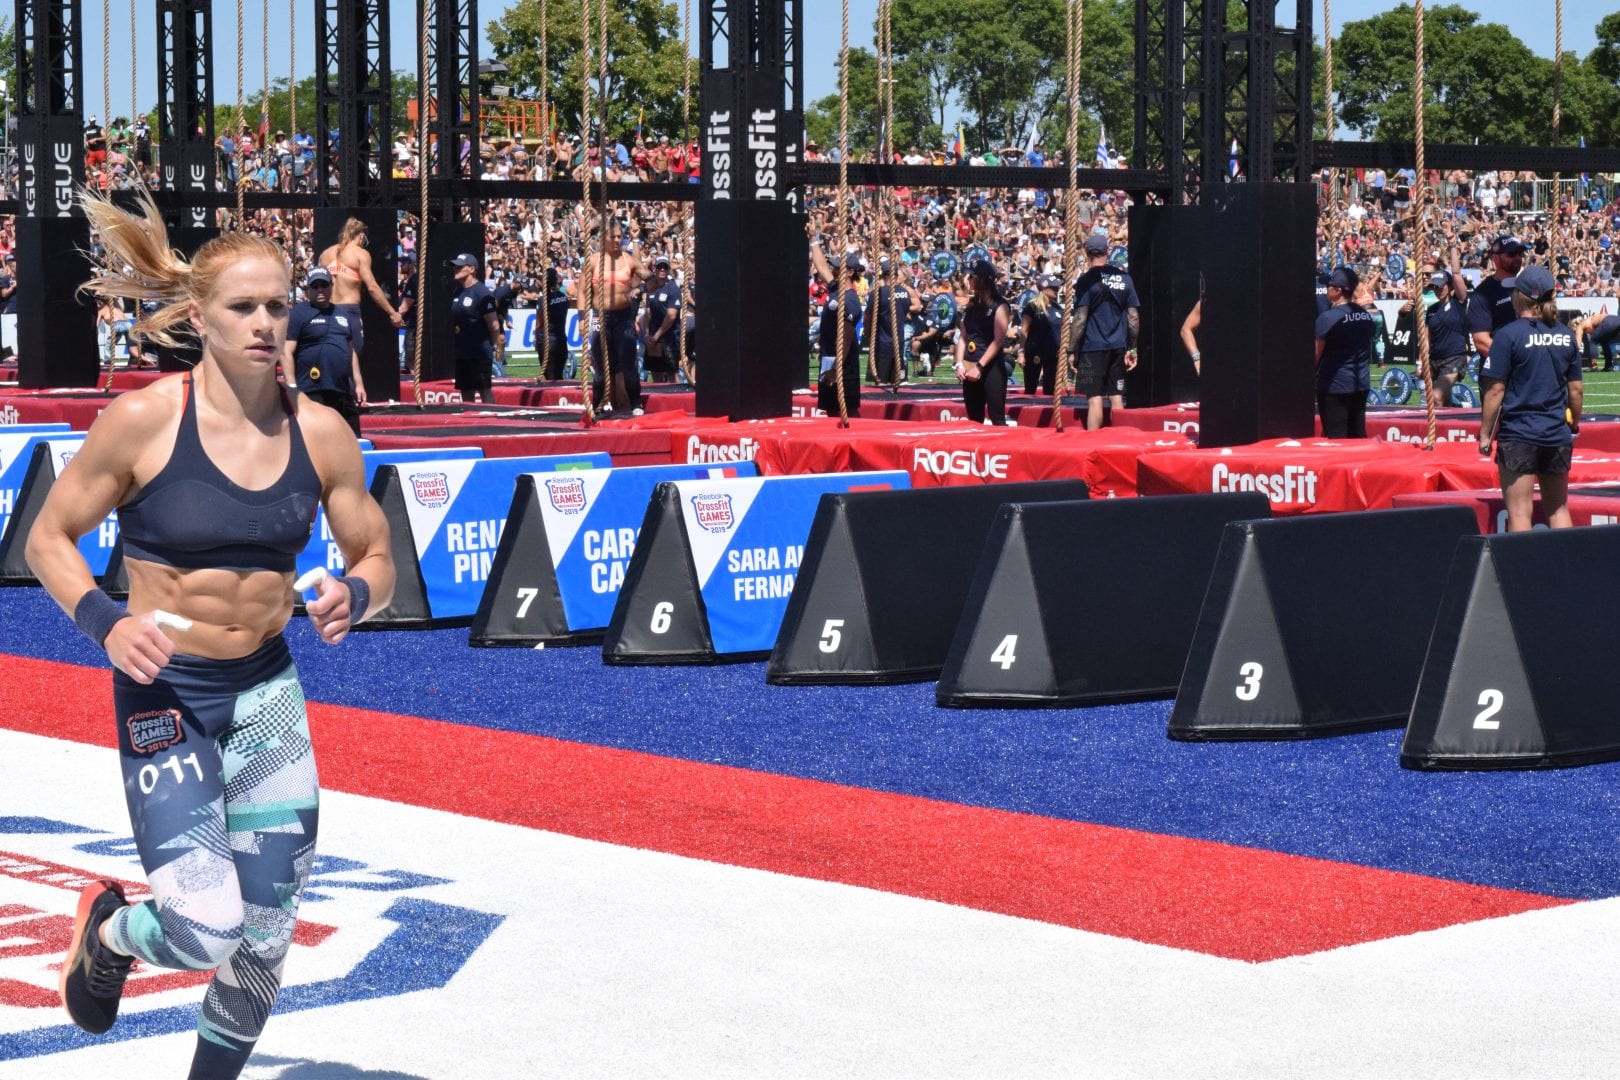 Annie Thorisdottir completes a run before starting her legless rope climbs at the CrossFit Games.